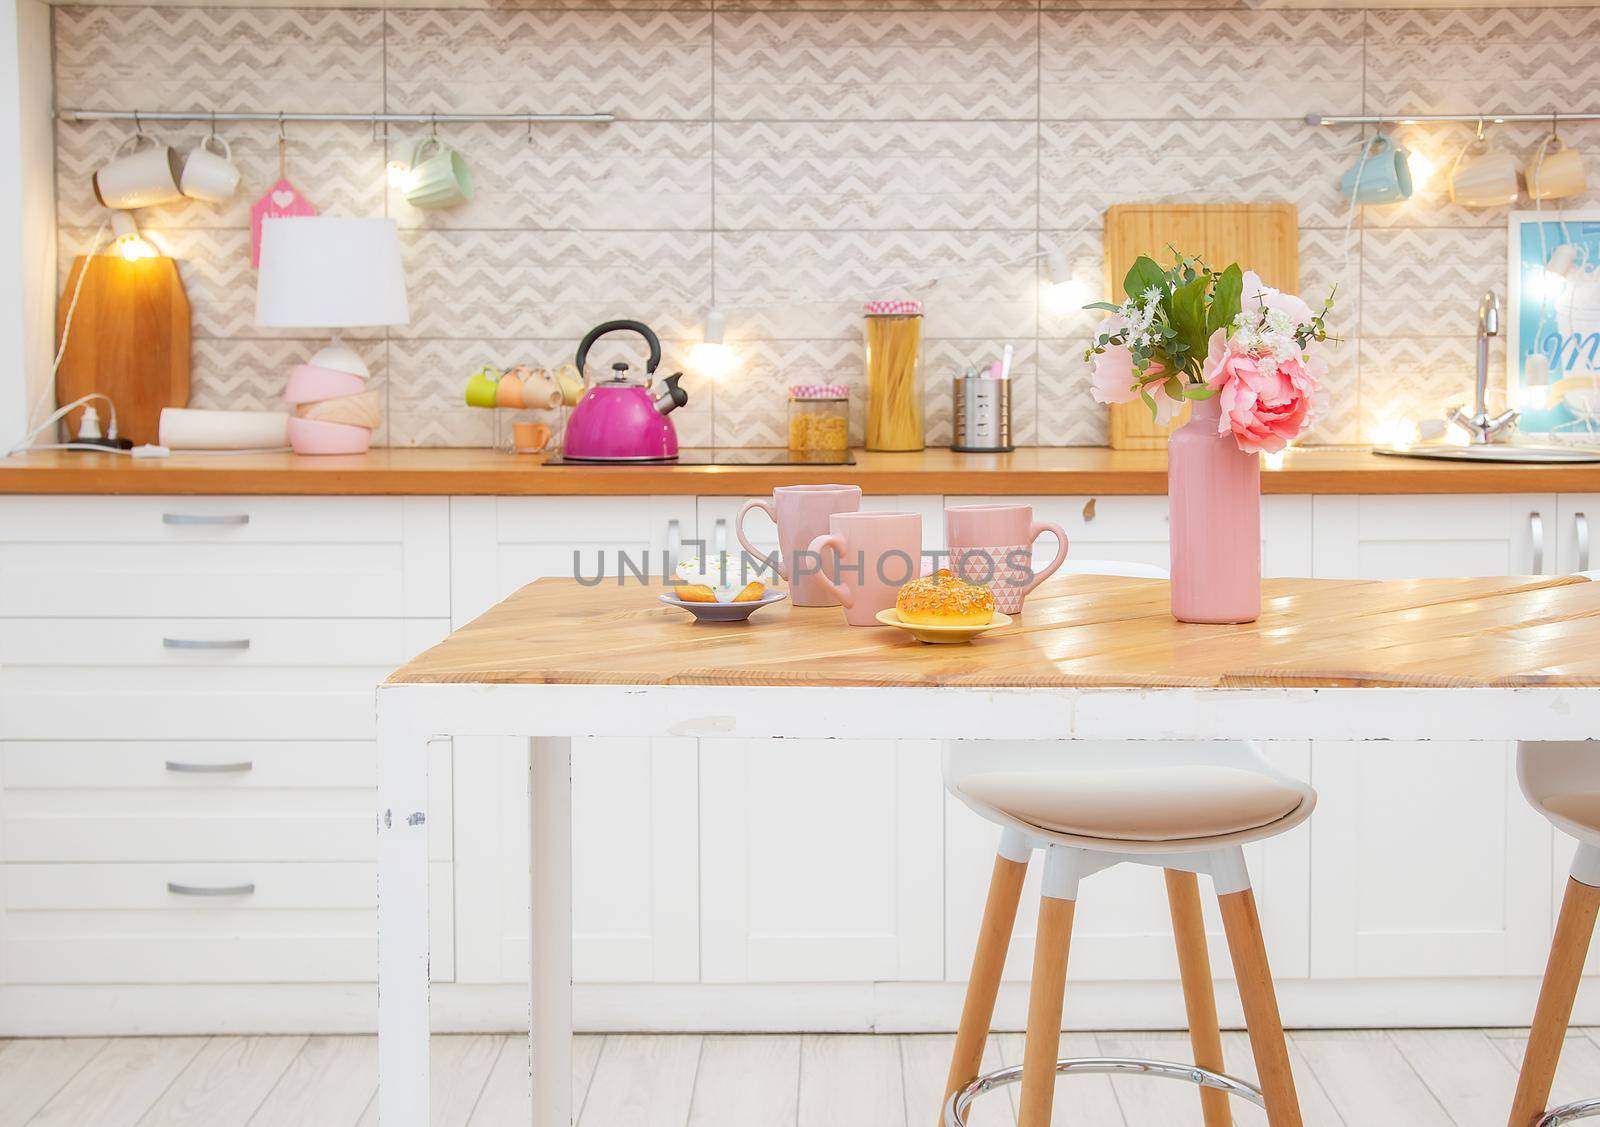 Pink vase with flowers and mugs for tea on the table in a light kitchen in the Scandinavian style.